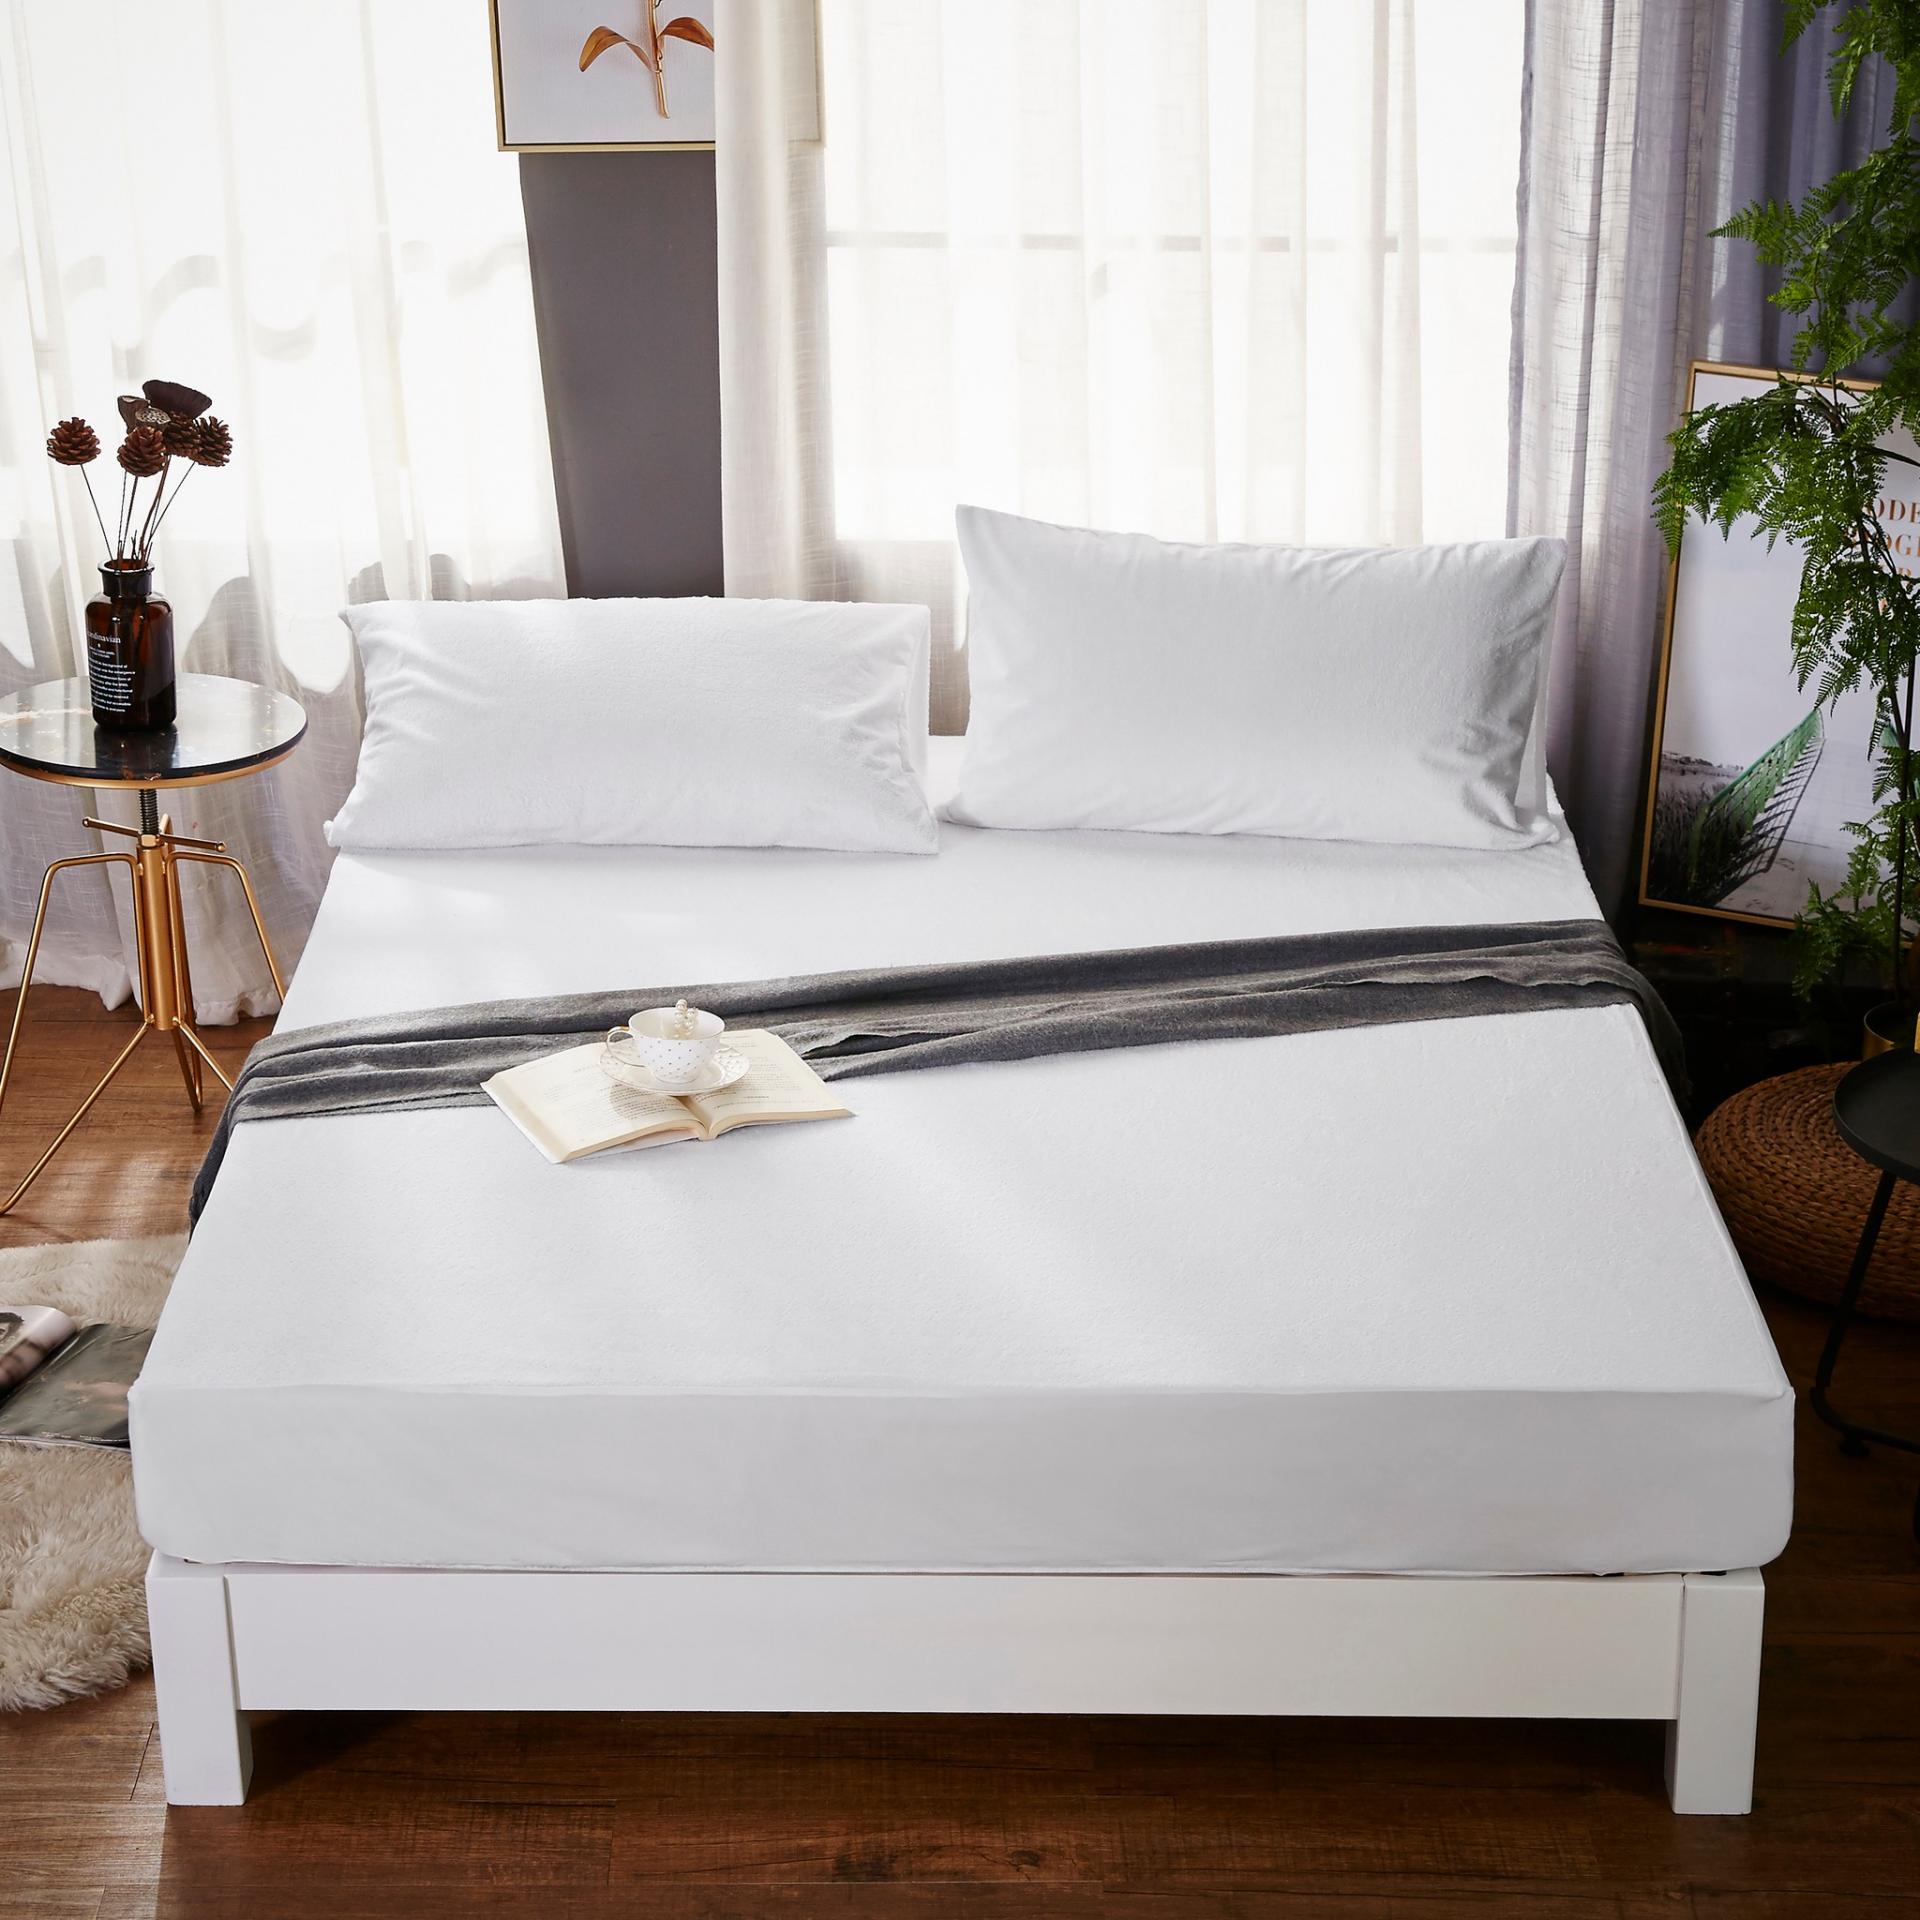 How To Get Rid Of Mattress Smell  